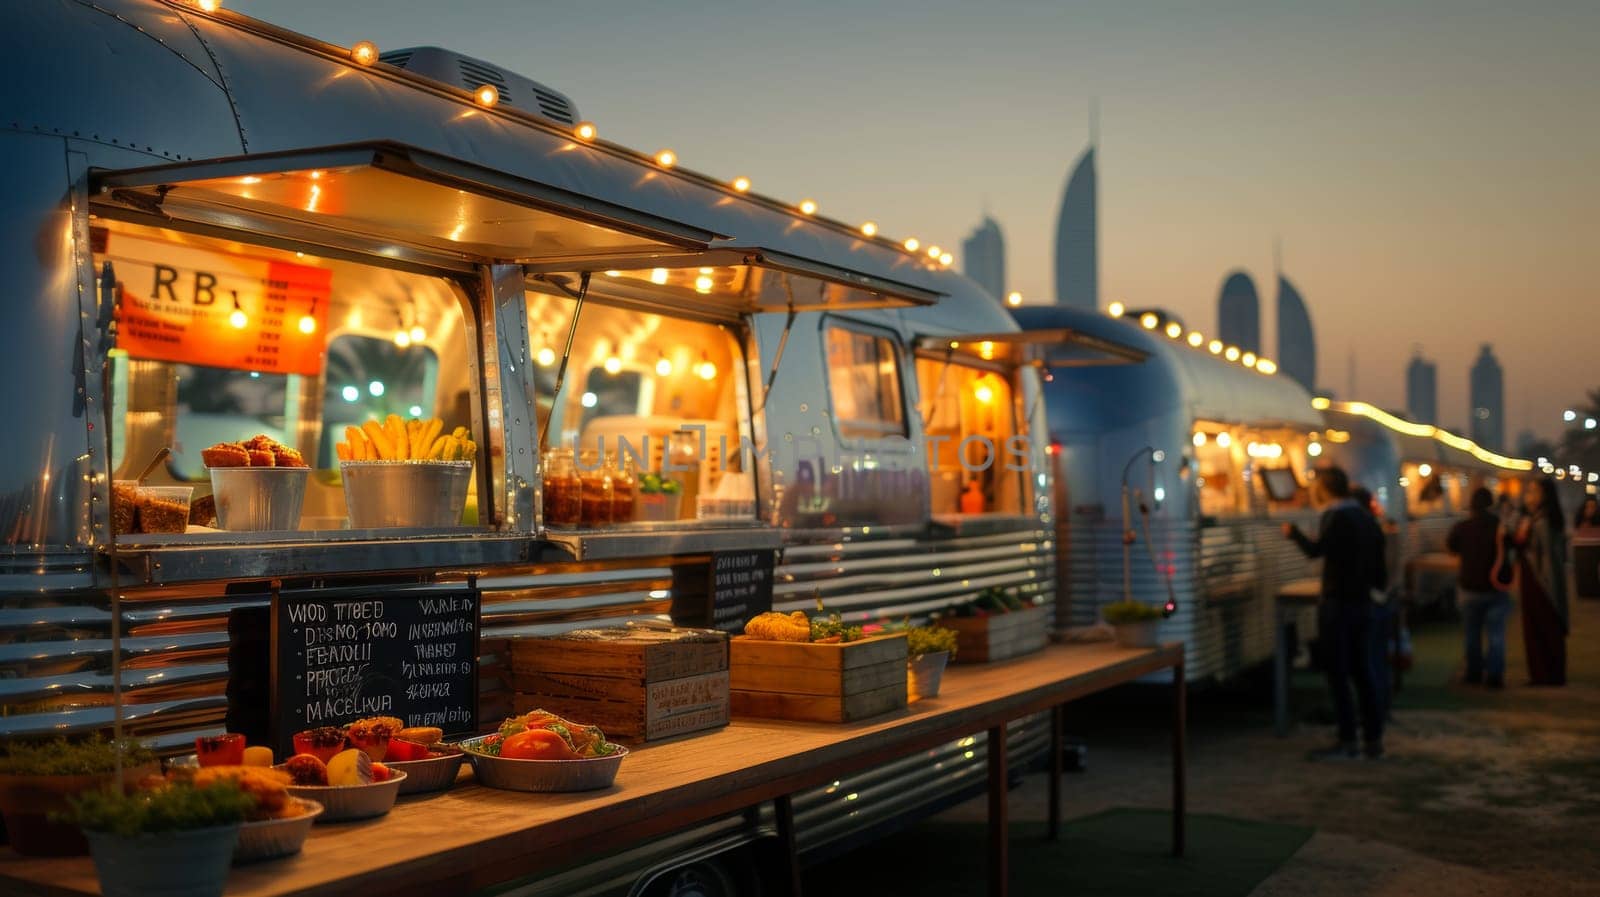 The Emirates Golf Club hosted a Food Truck Jam, an outdoor event with food trucks and live music, on March 26, 2016.